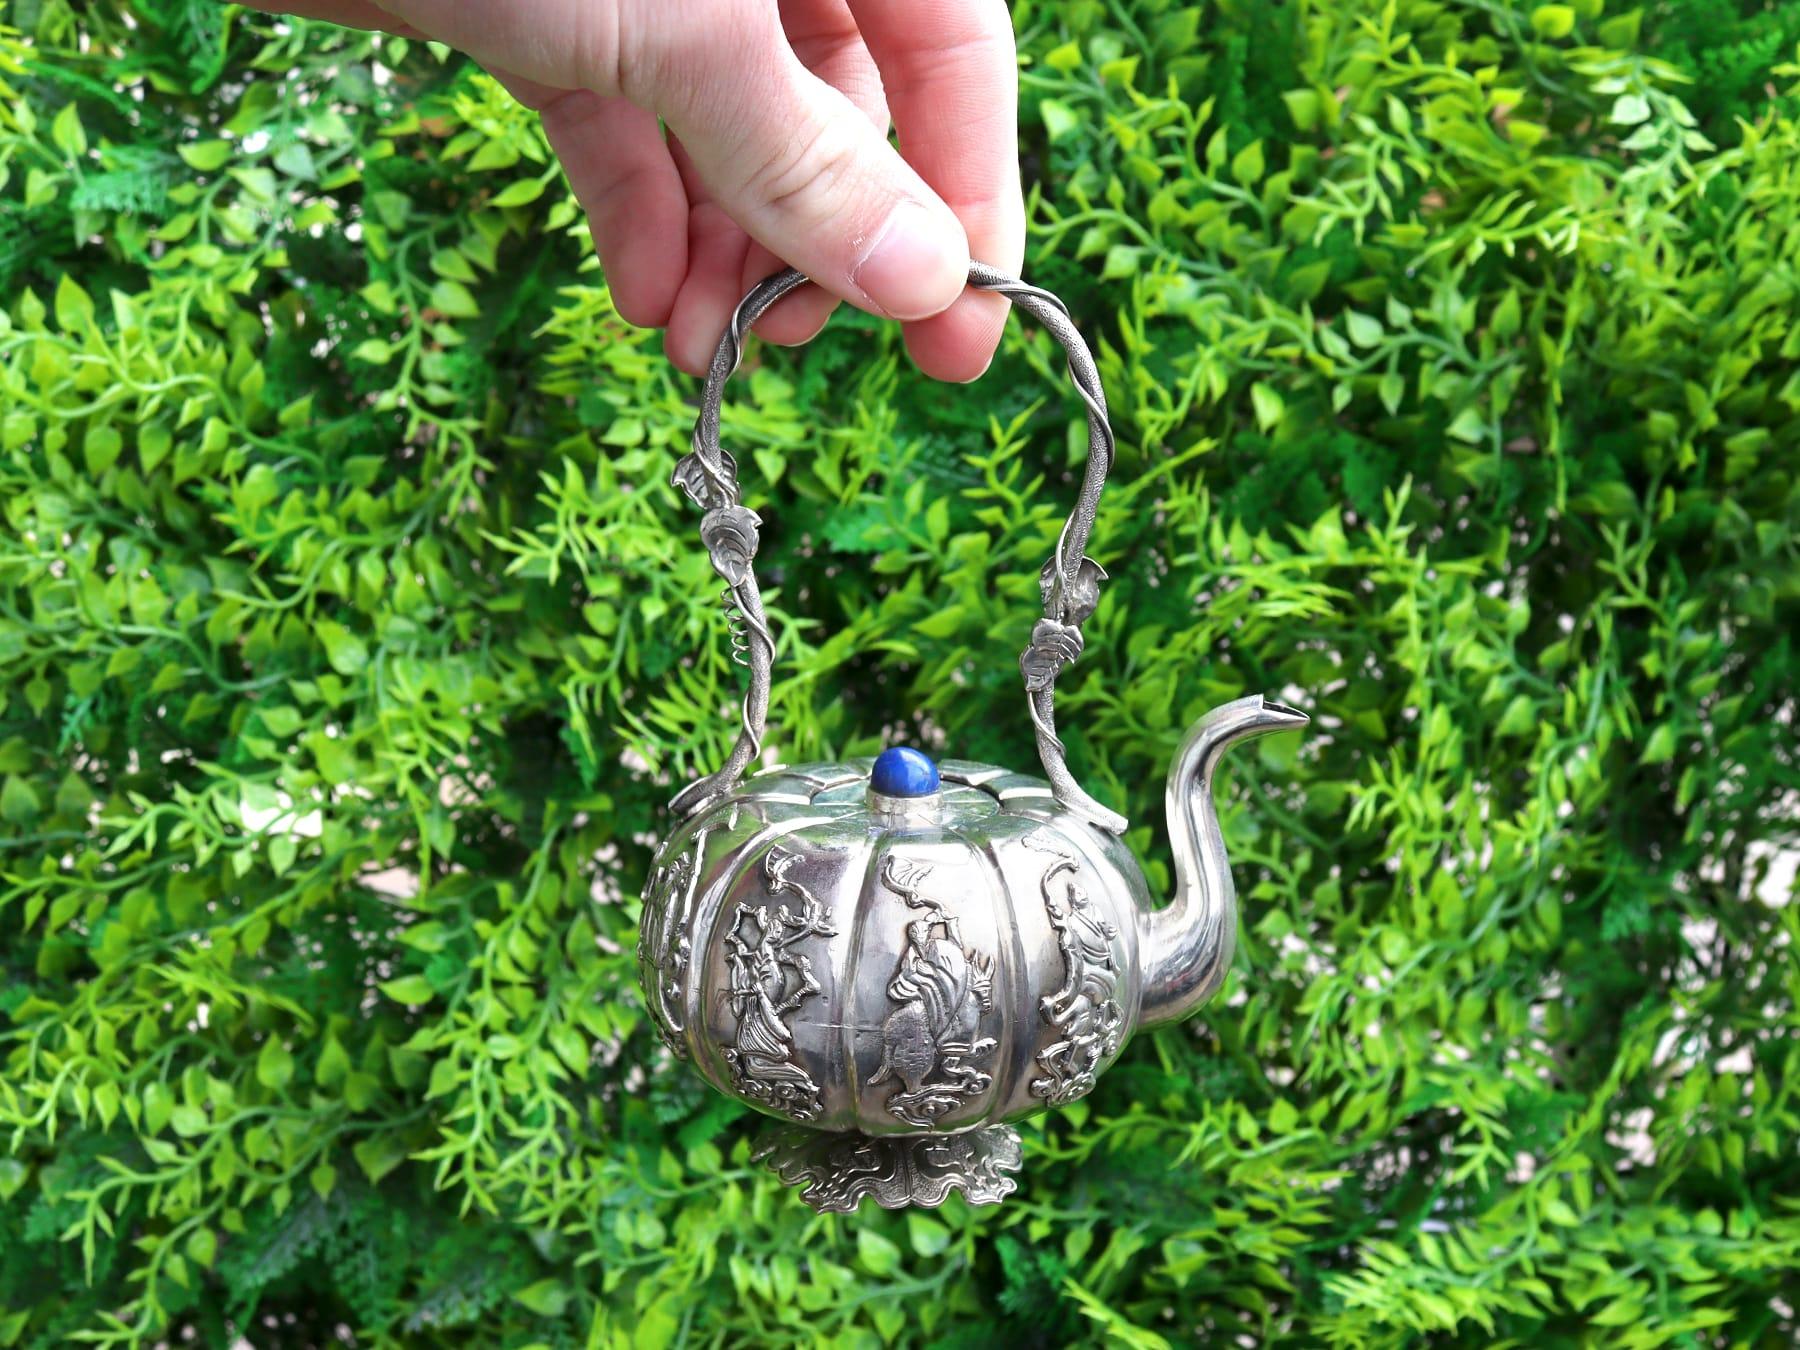 A fine and impressive antique Iraqi silver teapot; an addition to our diverse Asian teaware collection.

This fine antique Iraqi silver miniature teapot has a pumpkin shaped form onto a shaped cinquefoil foot.

Each panel of the body is